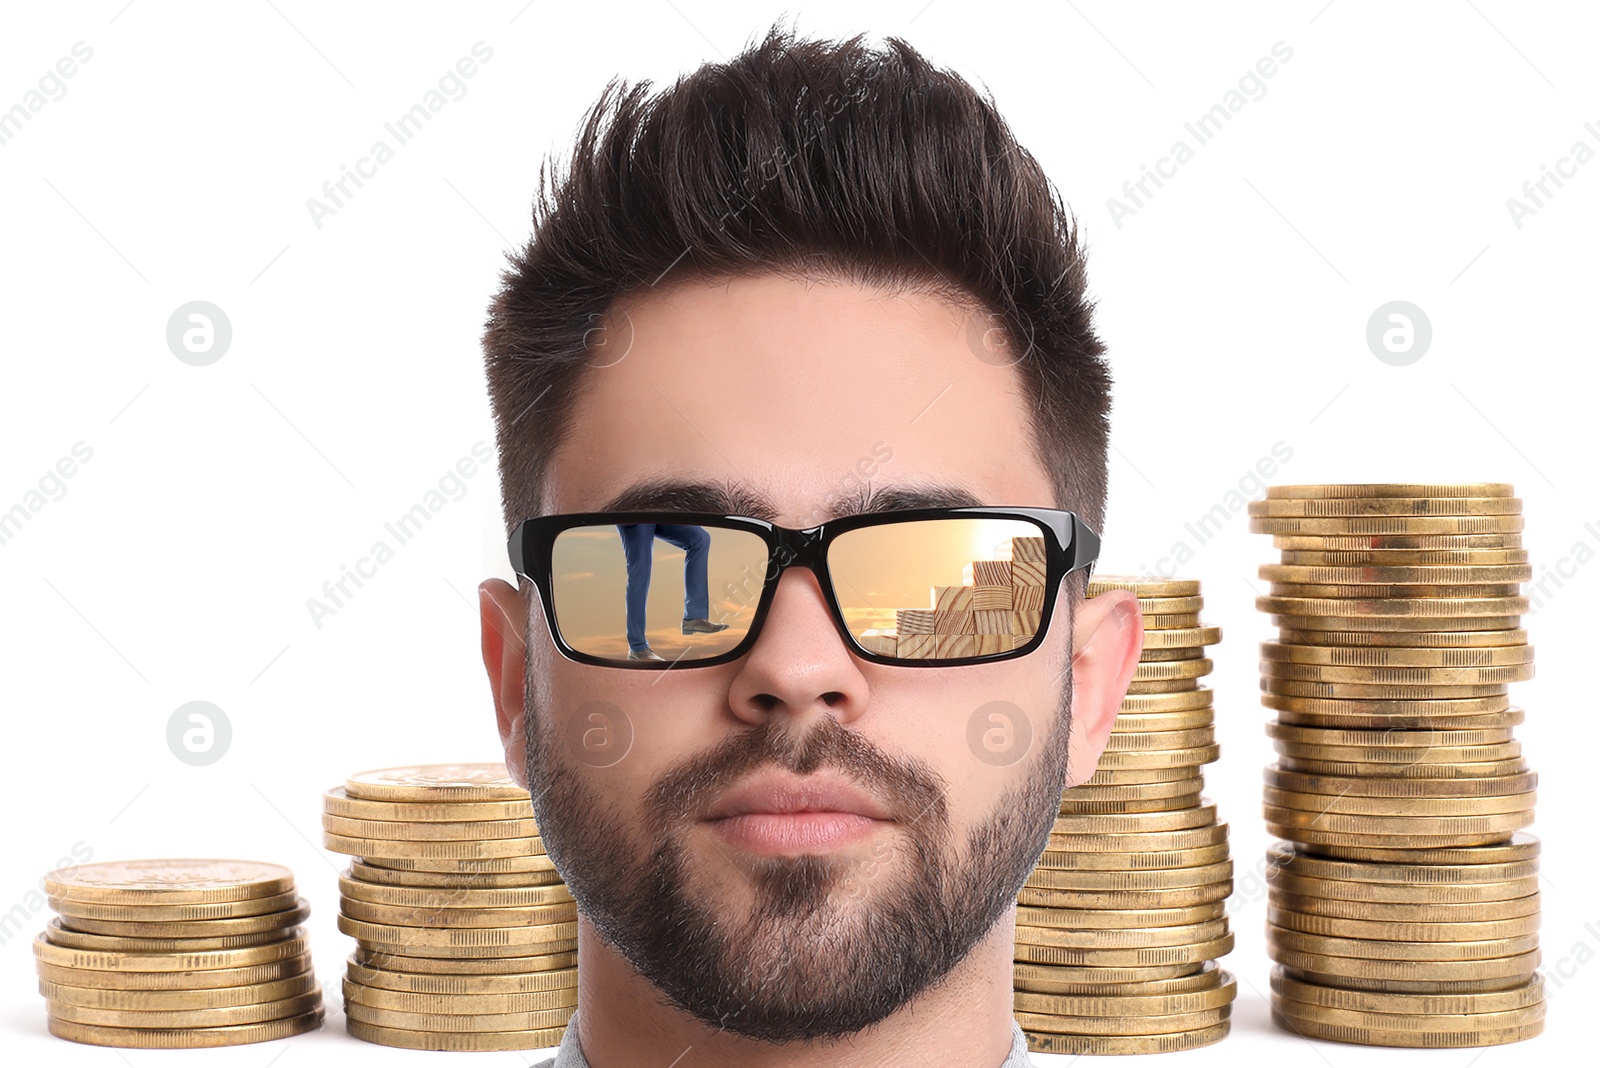 Image of Steps to success. Confident man against stacked coins on white background. Businessman climbing up stairs of wooden blocks, reflection in sunglasses